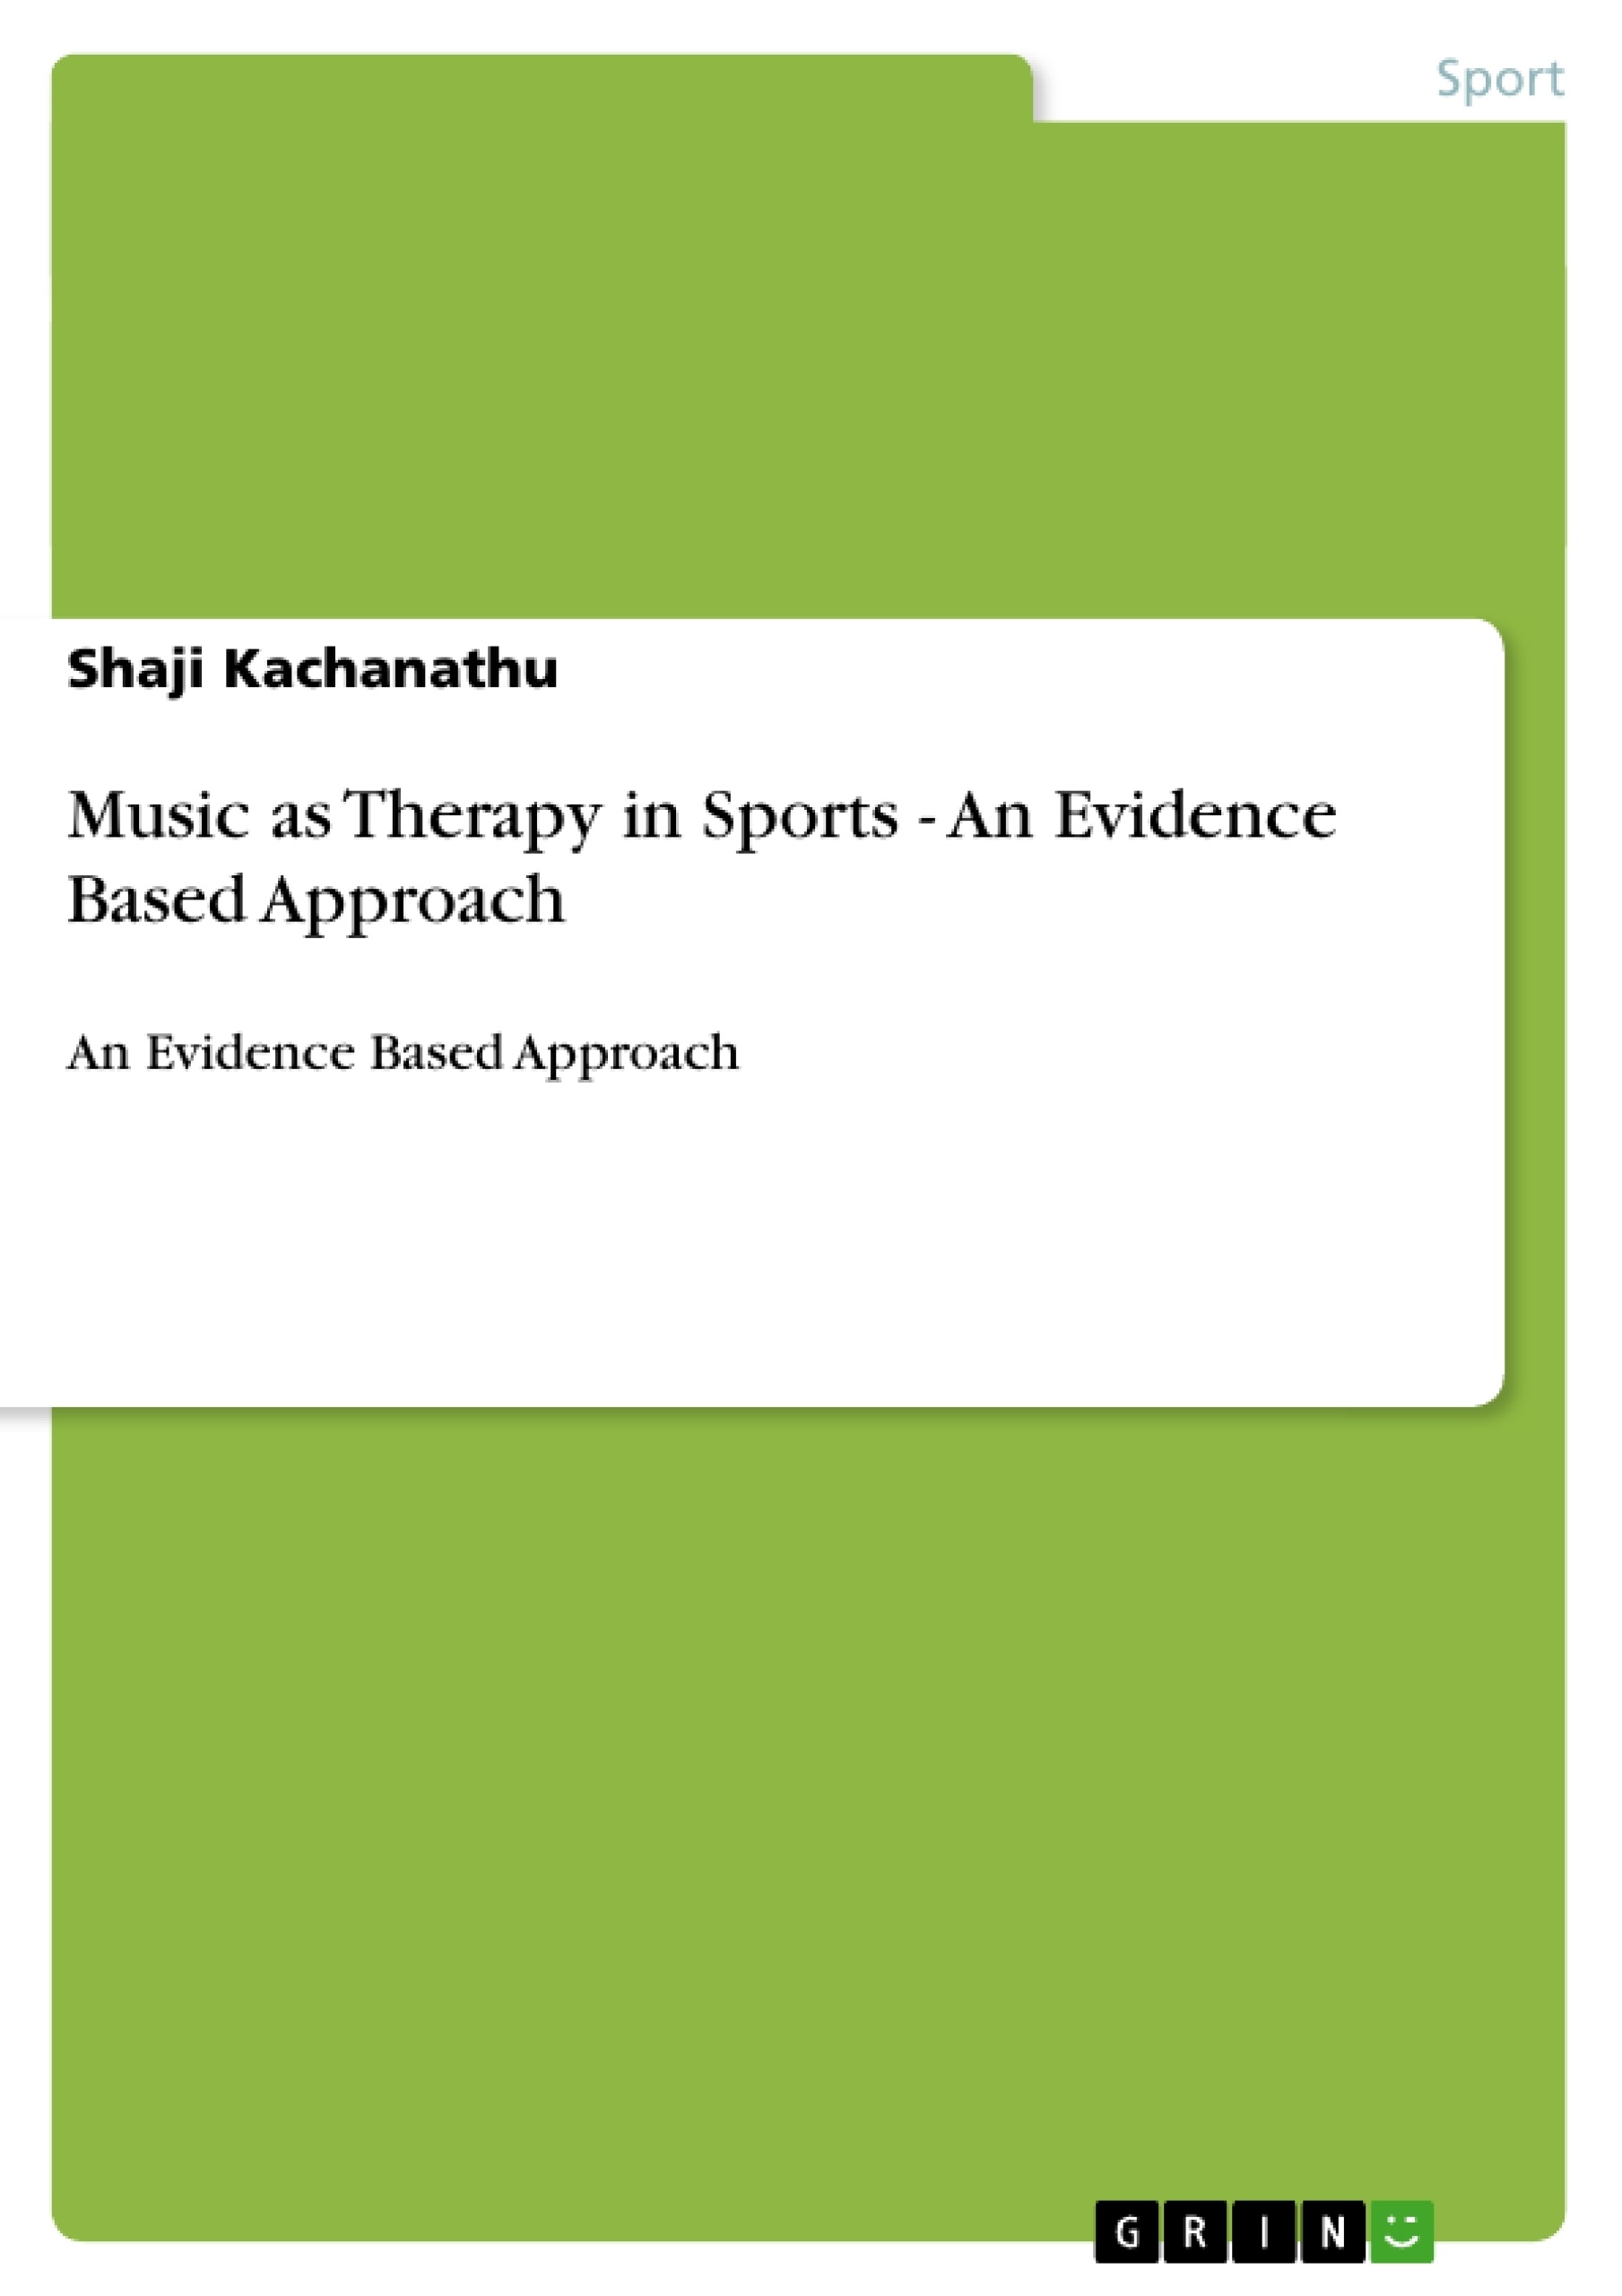 Title: Music as Therapy in Sports - An Evidence Based Approach